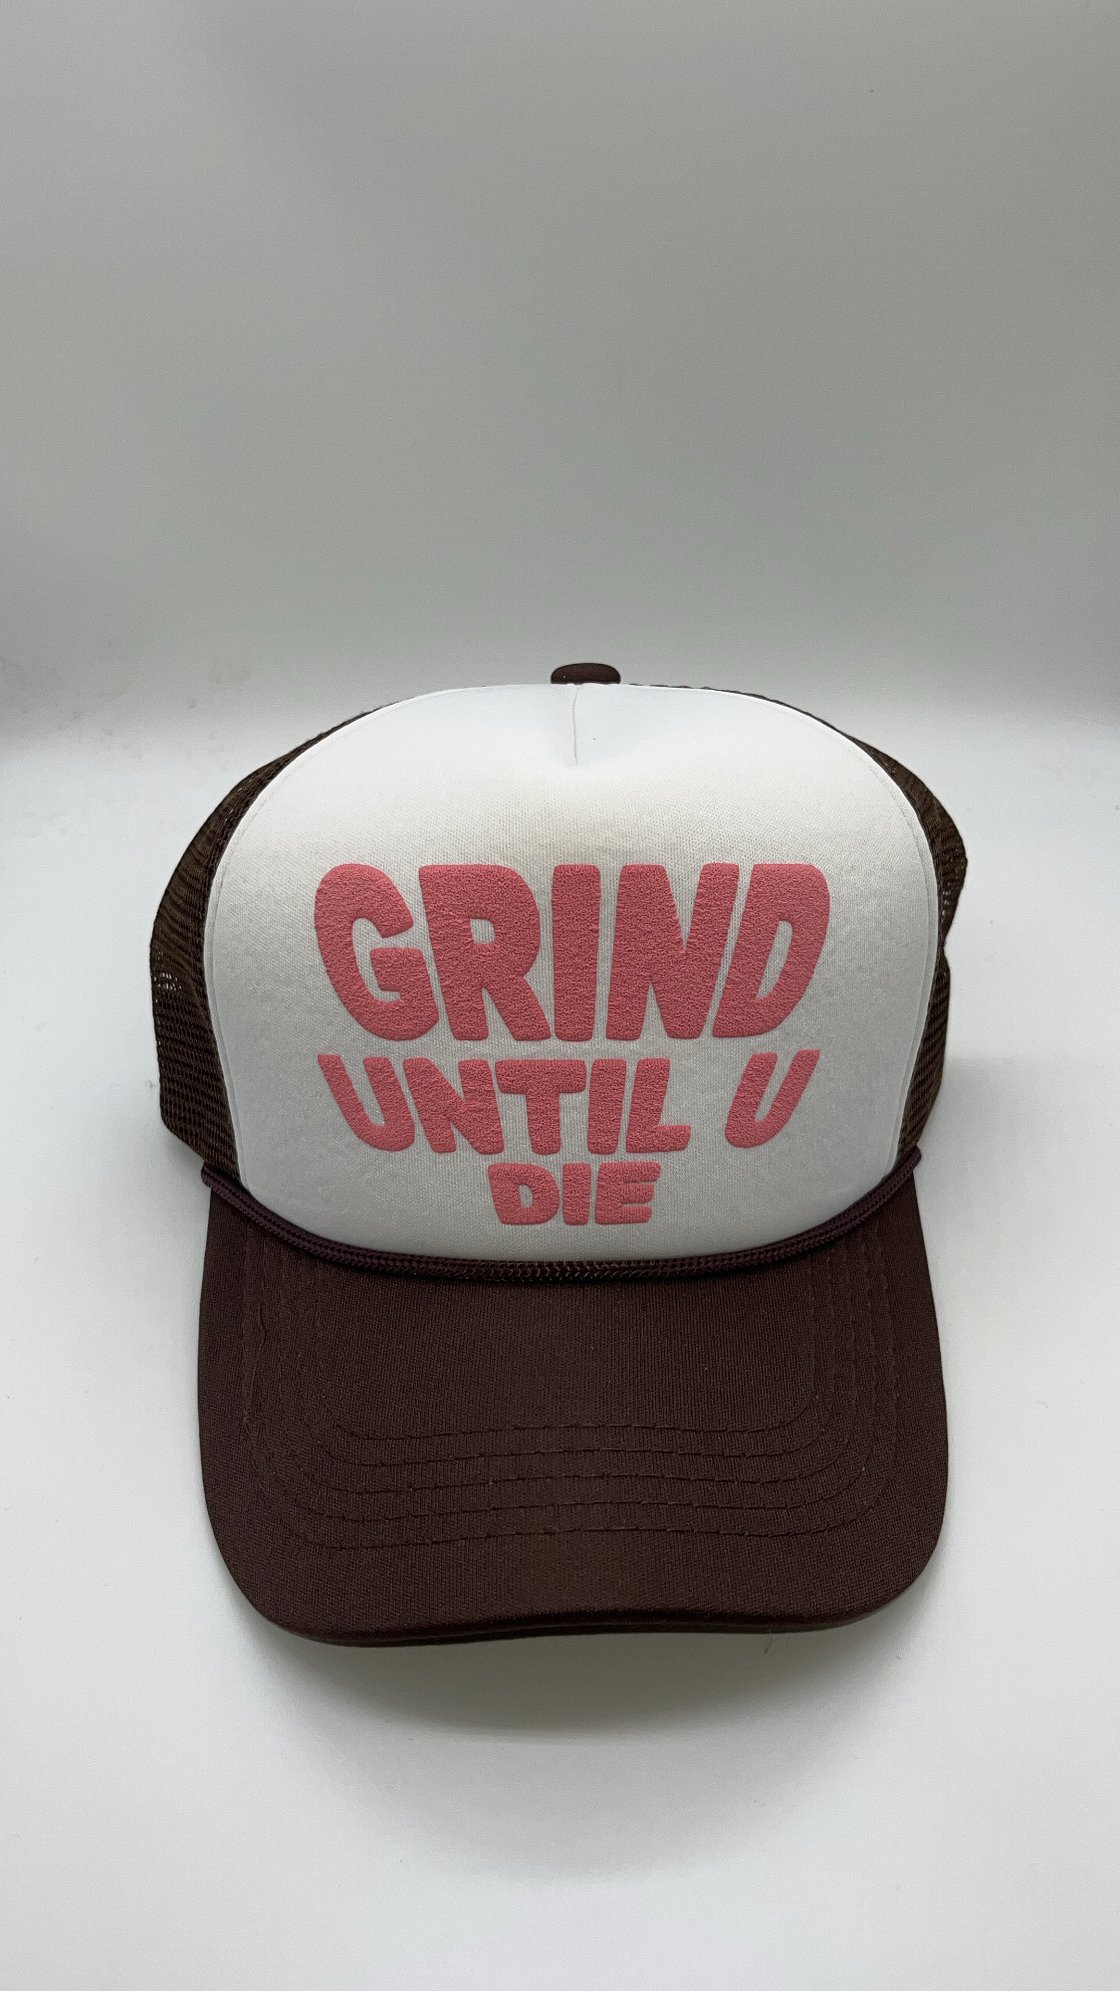 Image of Guud "Two Tone" Trucker Hat 9